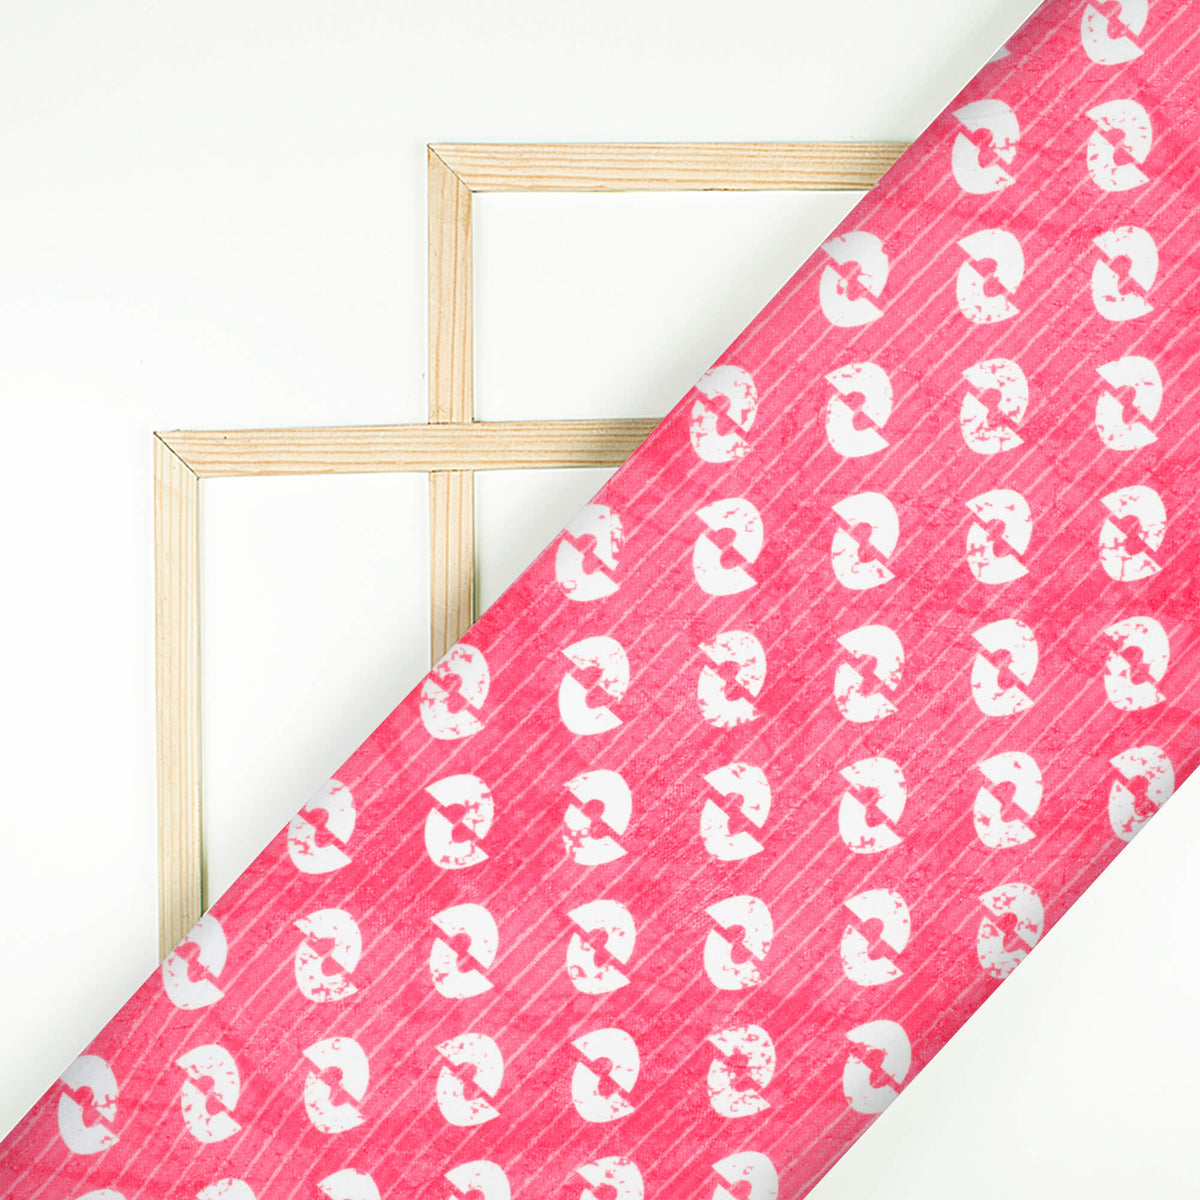 Hot Pink And White Quirky Pattern Digital Print Crepe Silk Fabric